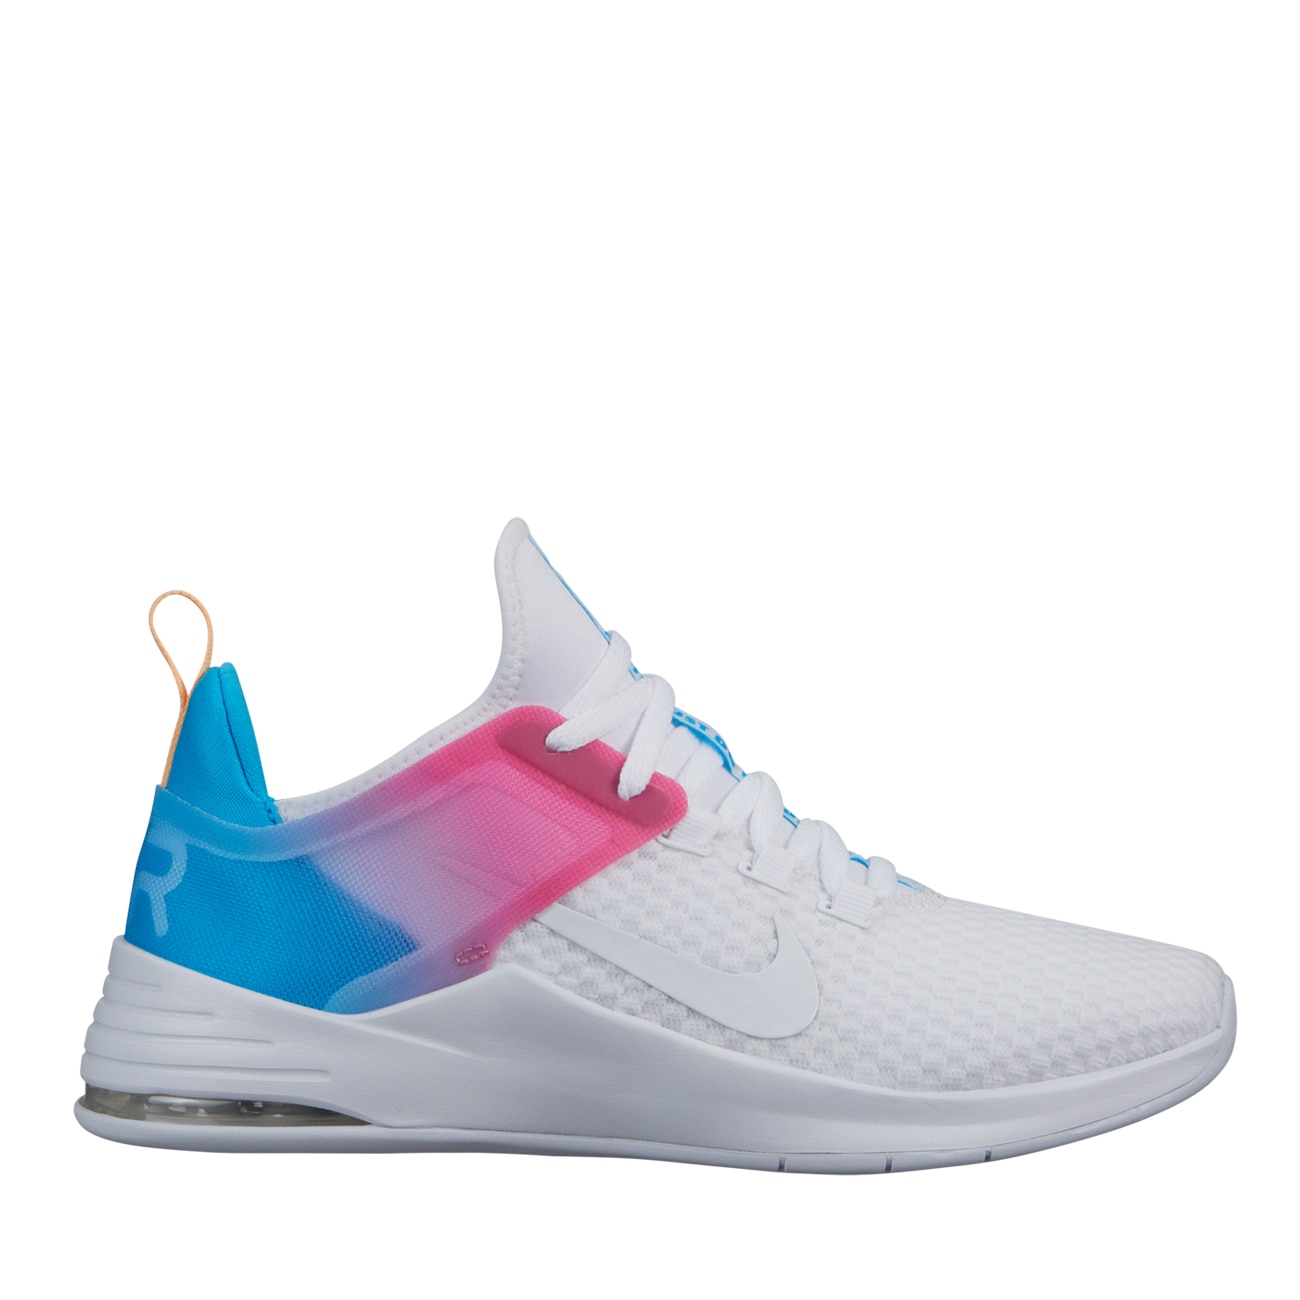 nike training air max bella tr 2 in off white